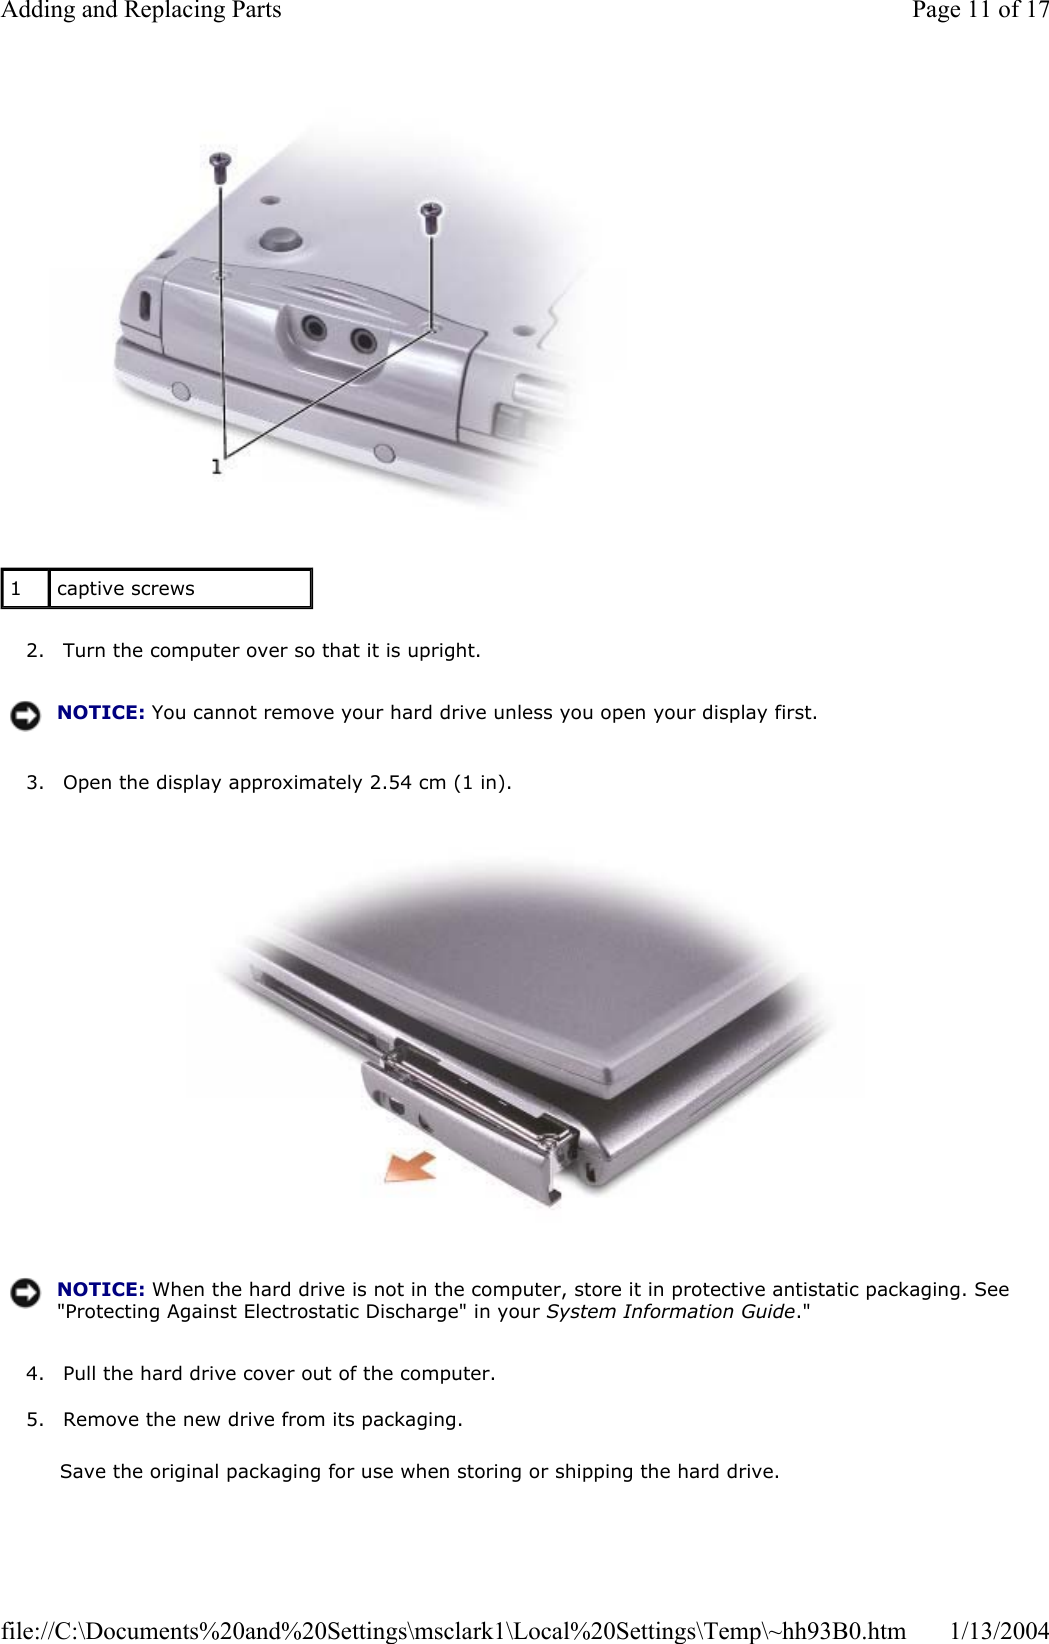 2. Turn the computer over so that it is upright. 3. Open the display approximately 2.54 cm (1 in). 4. Pull the hard drive cover out of the computer. 5. Remove the new drive from its packaging. Save the original packaging for use when storing or shipping the hard drive. 1captive screws NOTICE: You cannot remove your hard drive unless you open your display first.NOTICE: When the hard drive is not in the computer, store it in protective antistatic packaging. See &quot;Protecting Against Electrostatic Discharge&quot; in your System Information Guide.&quot;Page 11 of 17Adding and Replacing Parts1/13/2004file://C:\Documents%20and%20Settings\msclark1\Local%20Settings\Temp\~hh93B0.htm